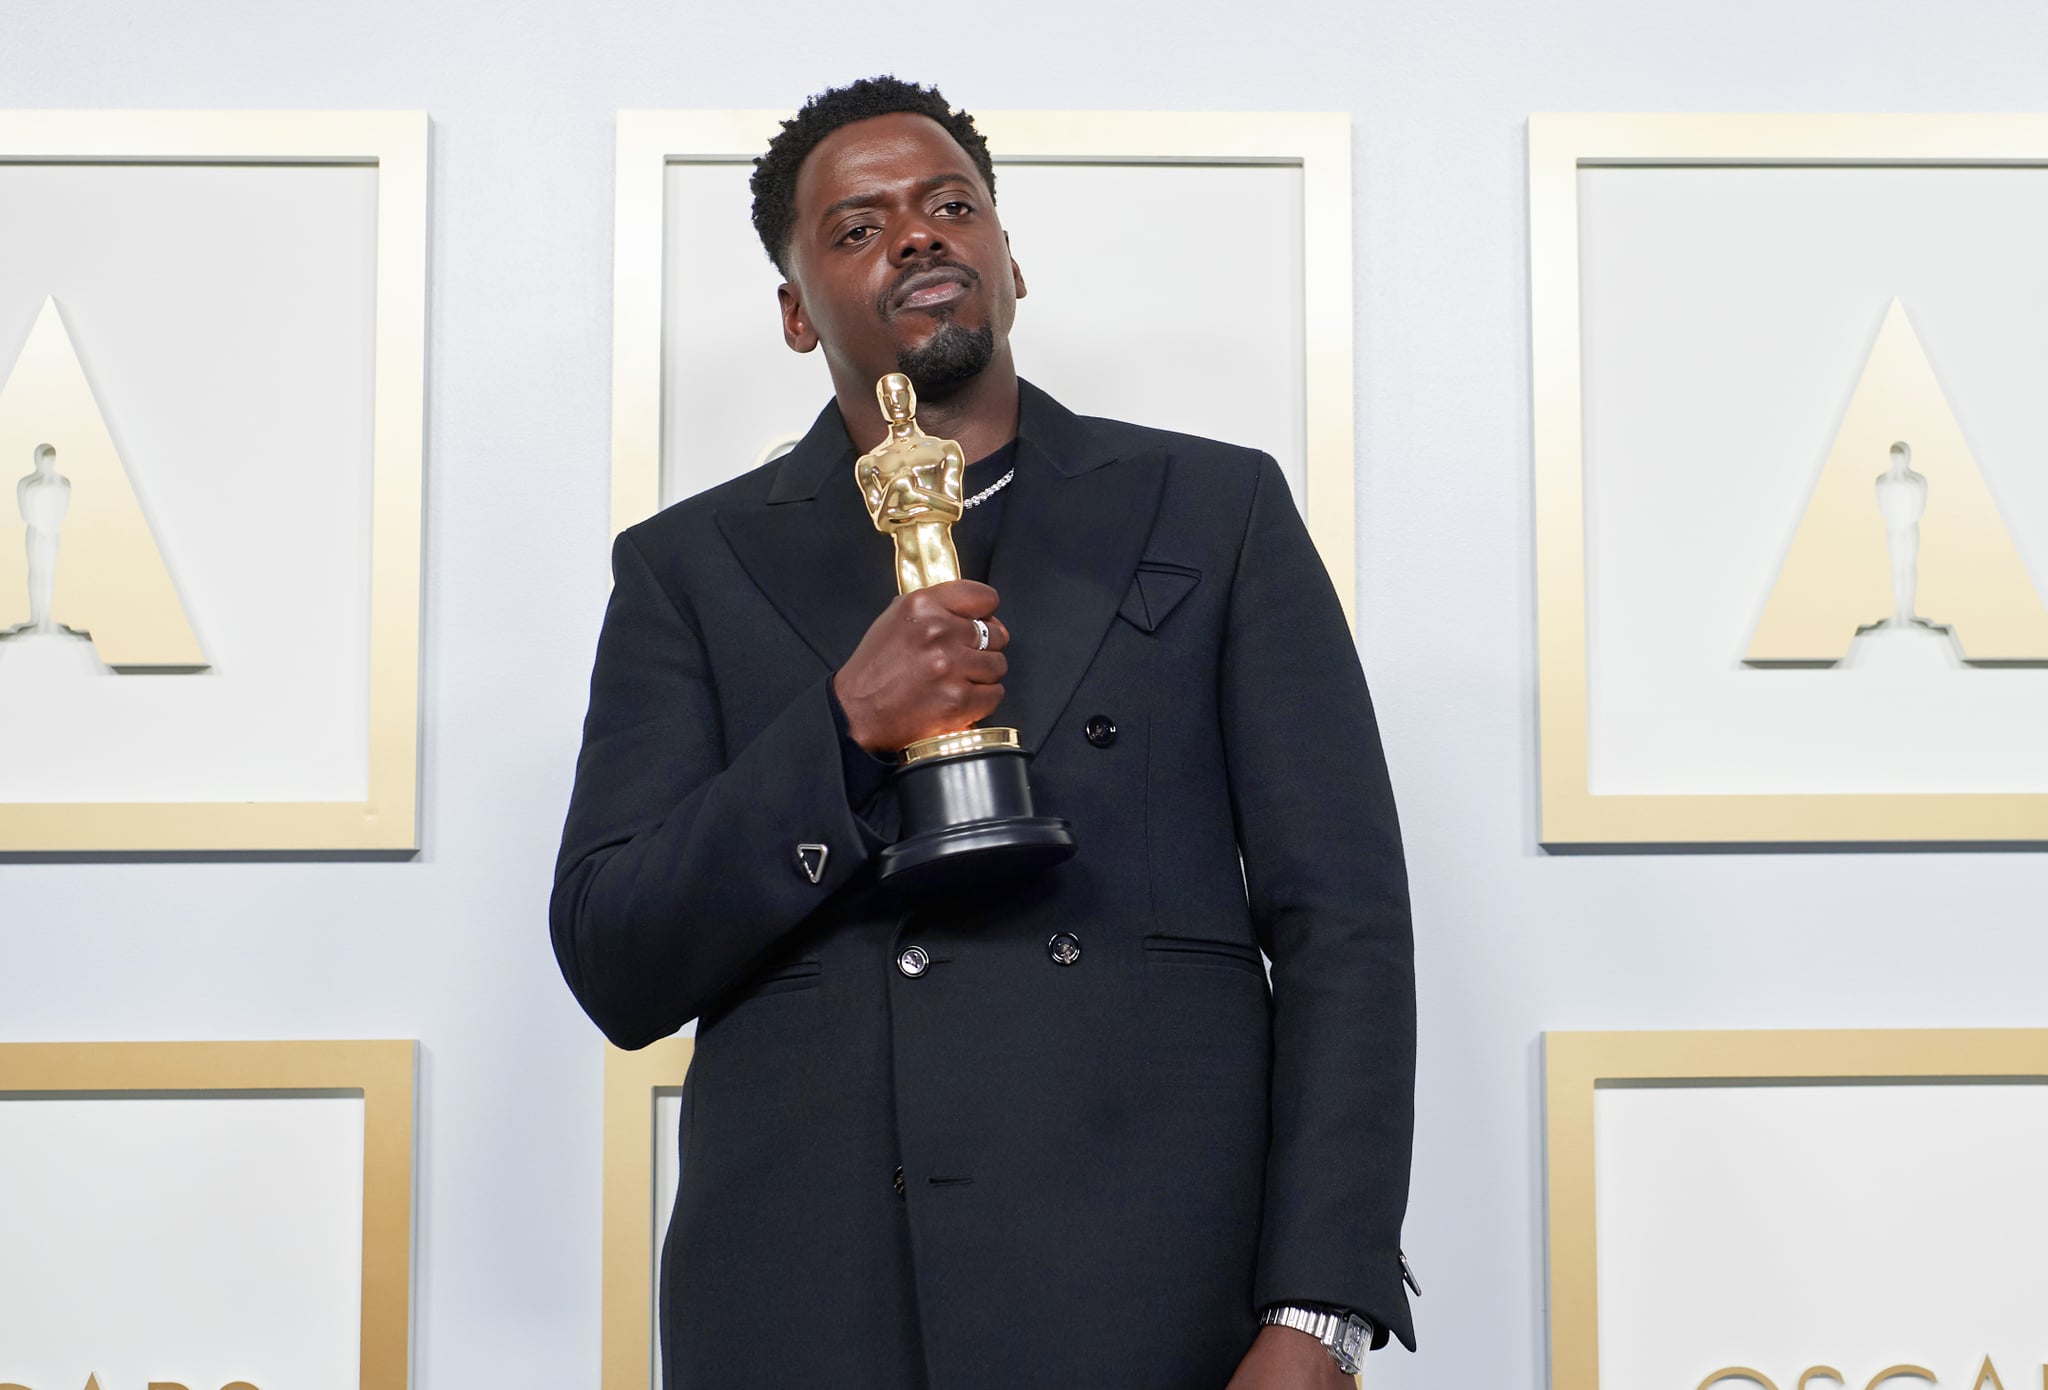 LOS ANGELES, CALIFORNIA – APRIL 25: (EDITORIAL USE ONLY) In this handout photo provided by A.M.P.A.S., Daniel Kaluuya poses with the Best Actor in a Supporting Role award for 'Judas and the Black Messiah' in the press room during the 93rd Annual Academy Awards at Union Station on April 25, 2021 in Los Angeles, California. (Photo by Matt Petit/A.M.P.A.S. via Getty Images)